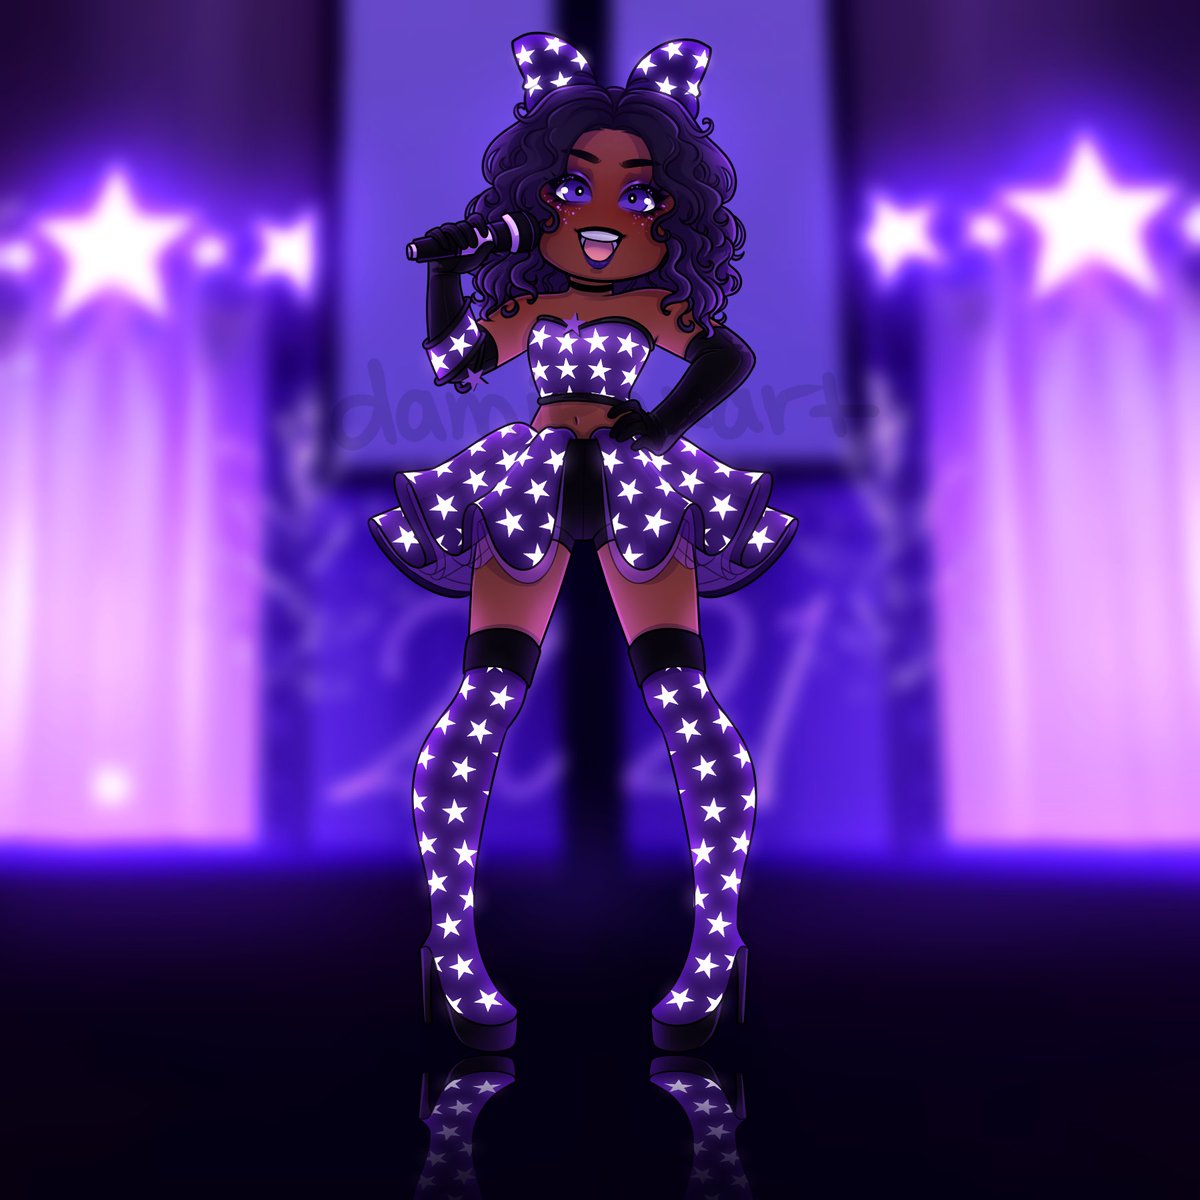 Barbie Nightbarbie Twitter The valorant release date for new character astra has been set for tuesday, march 2, and original: barbie nightbarbie twitter